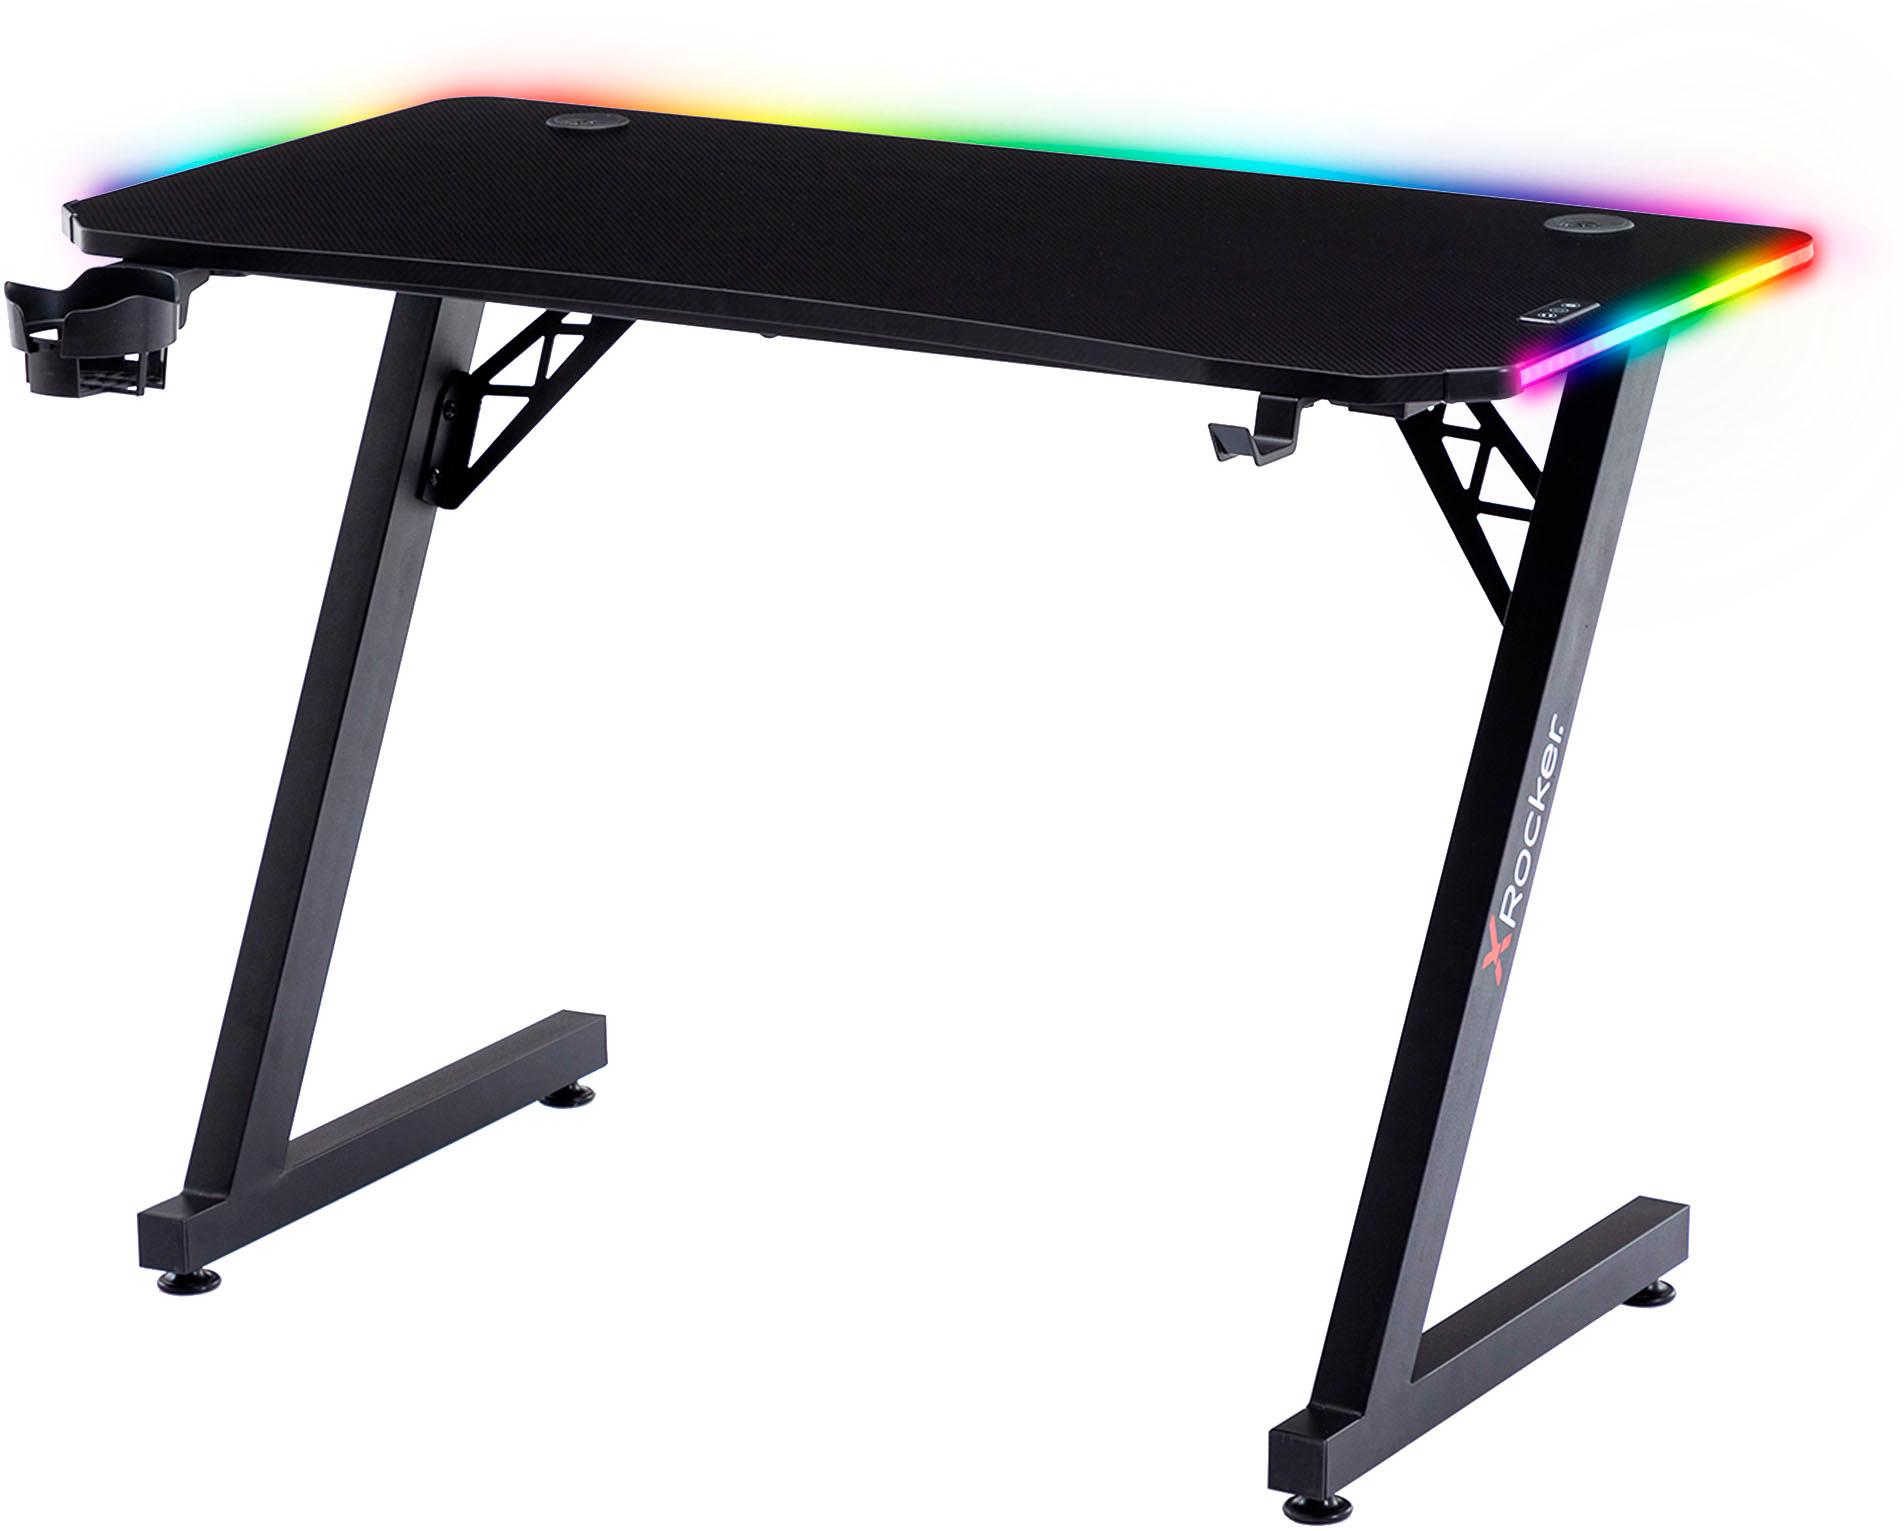 Angle View: Atlantic - Gaming Pro Straight Computer Desk - Charcoal